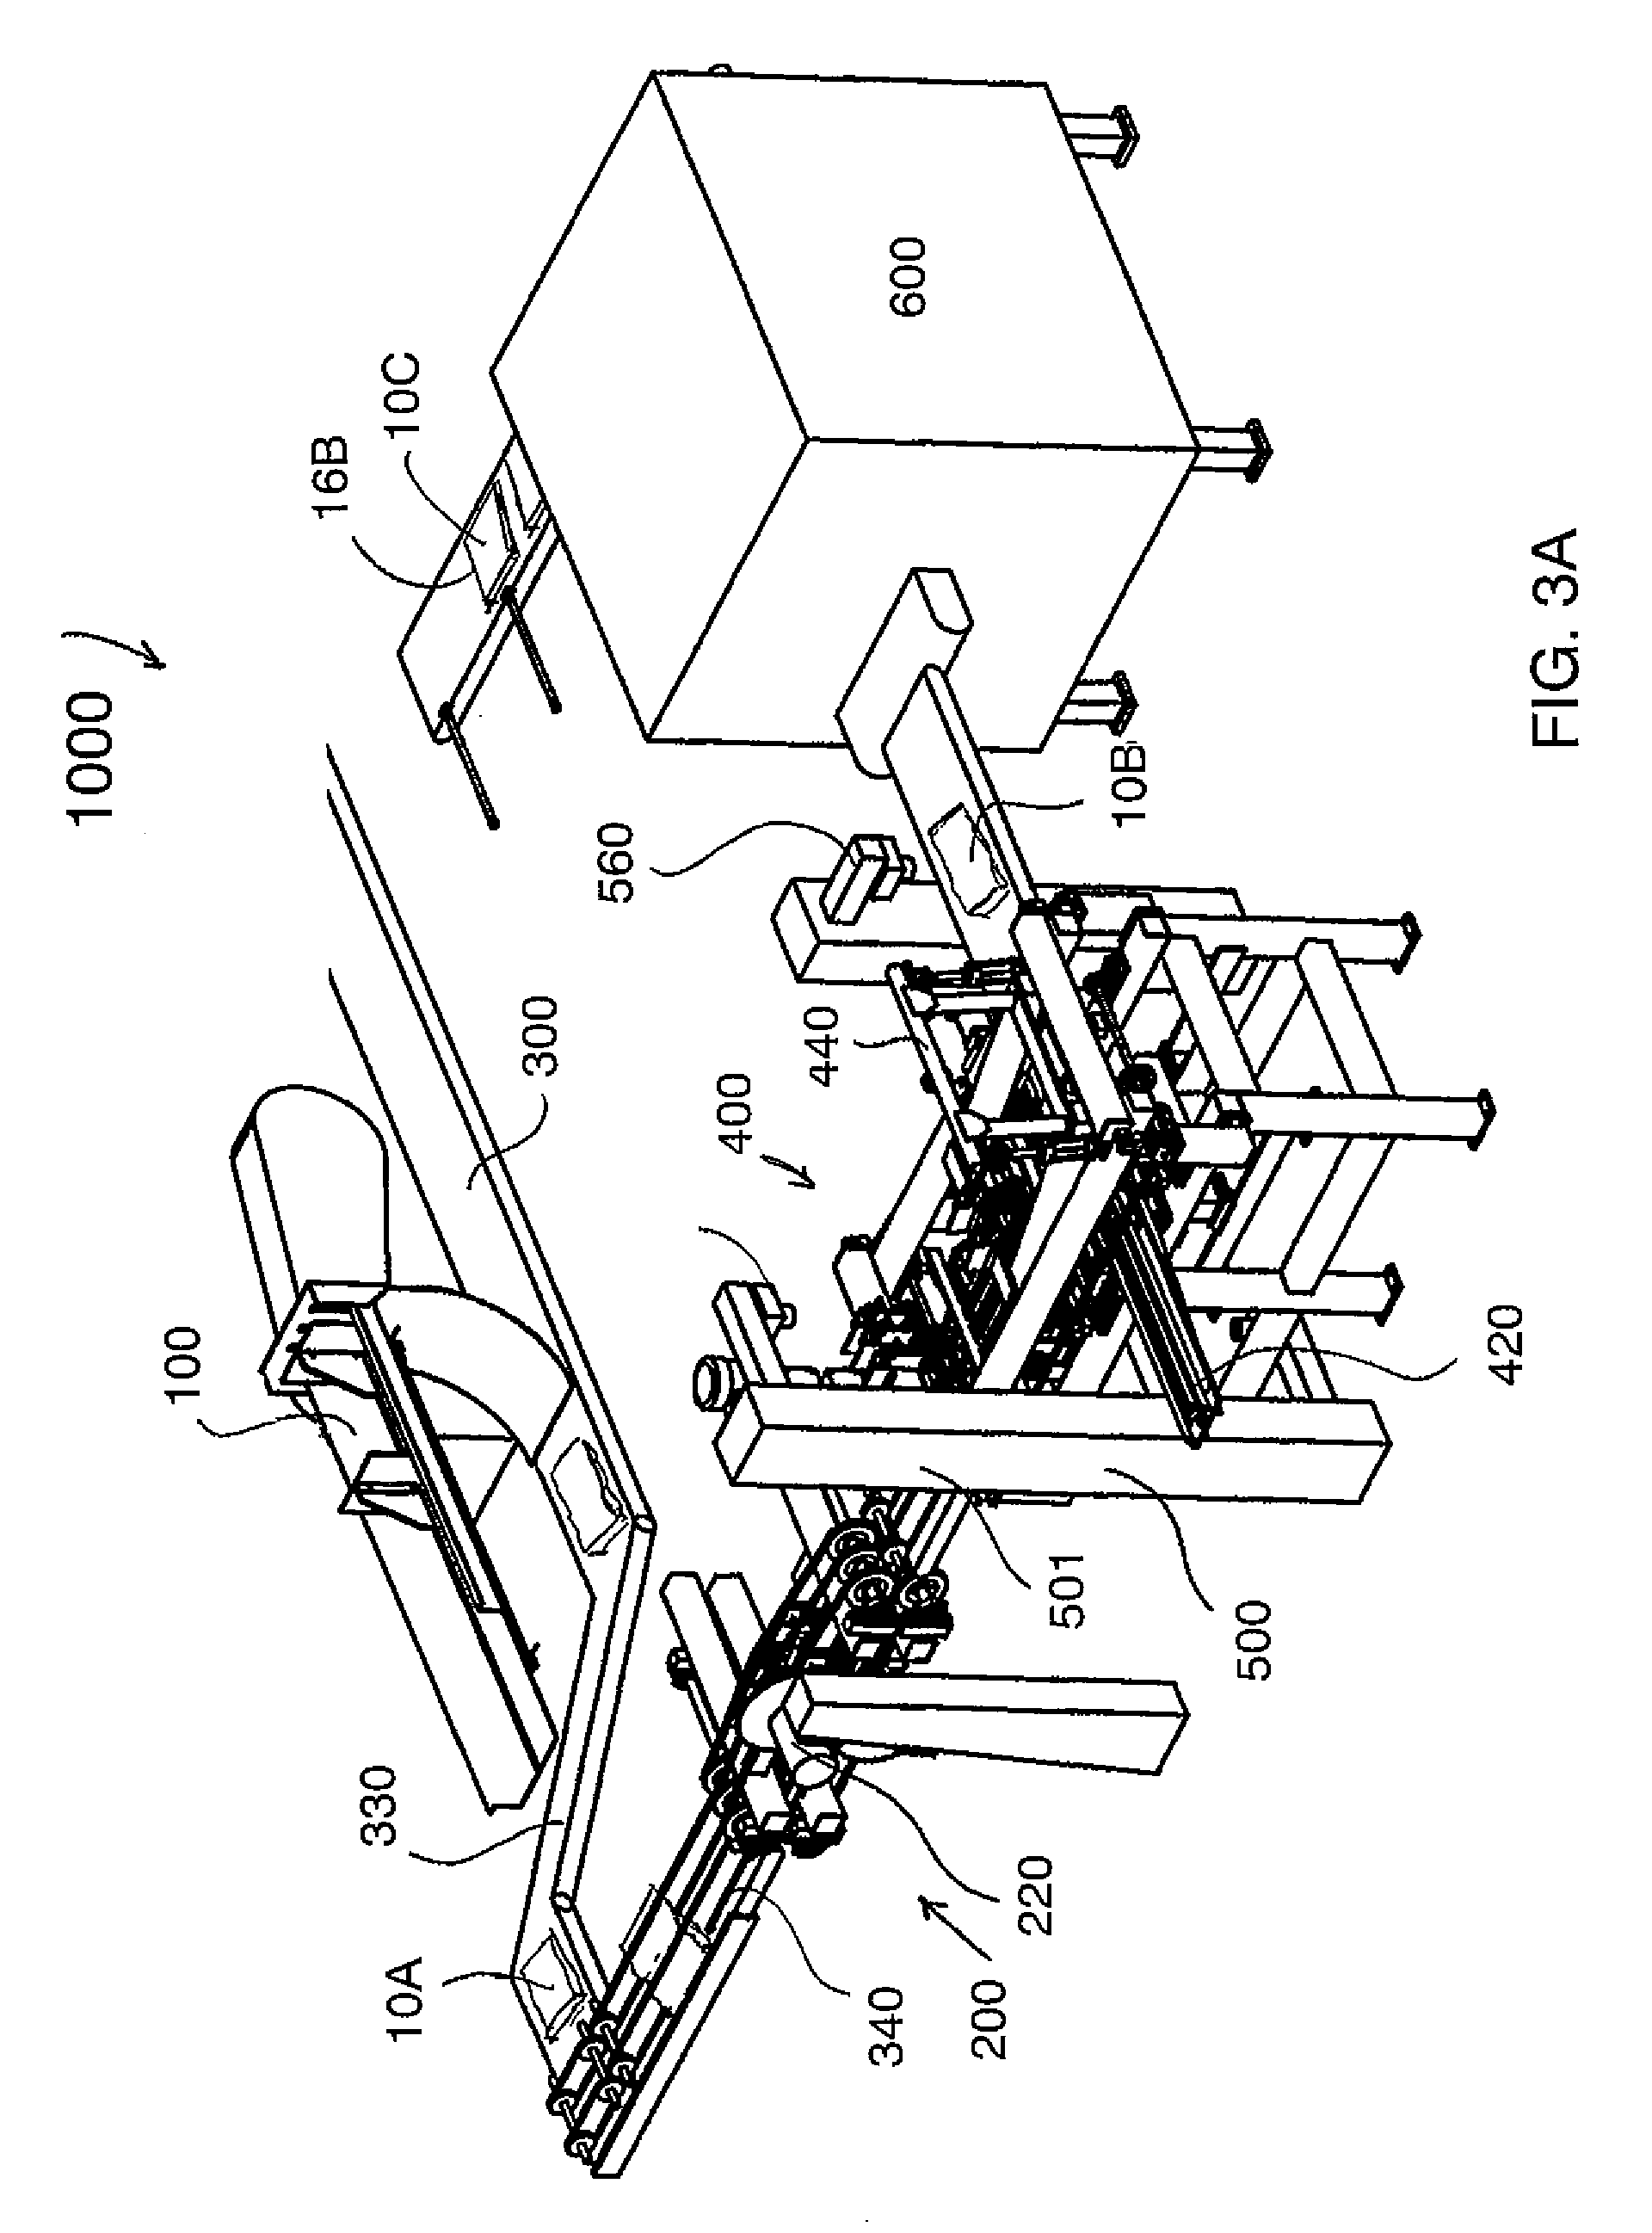 Automated shingle milling system